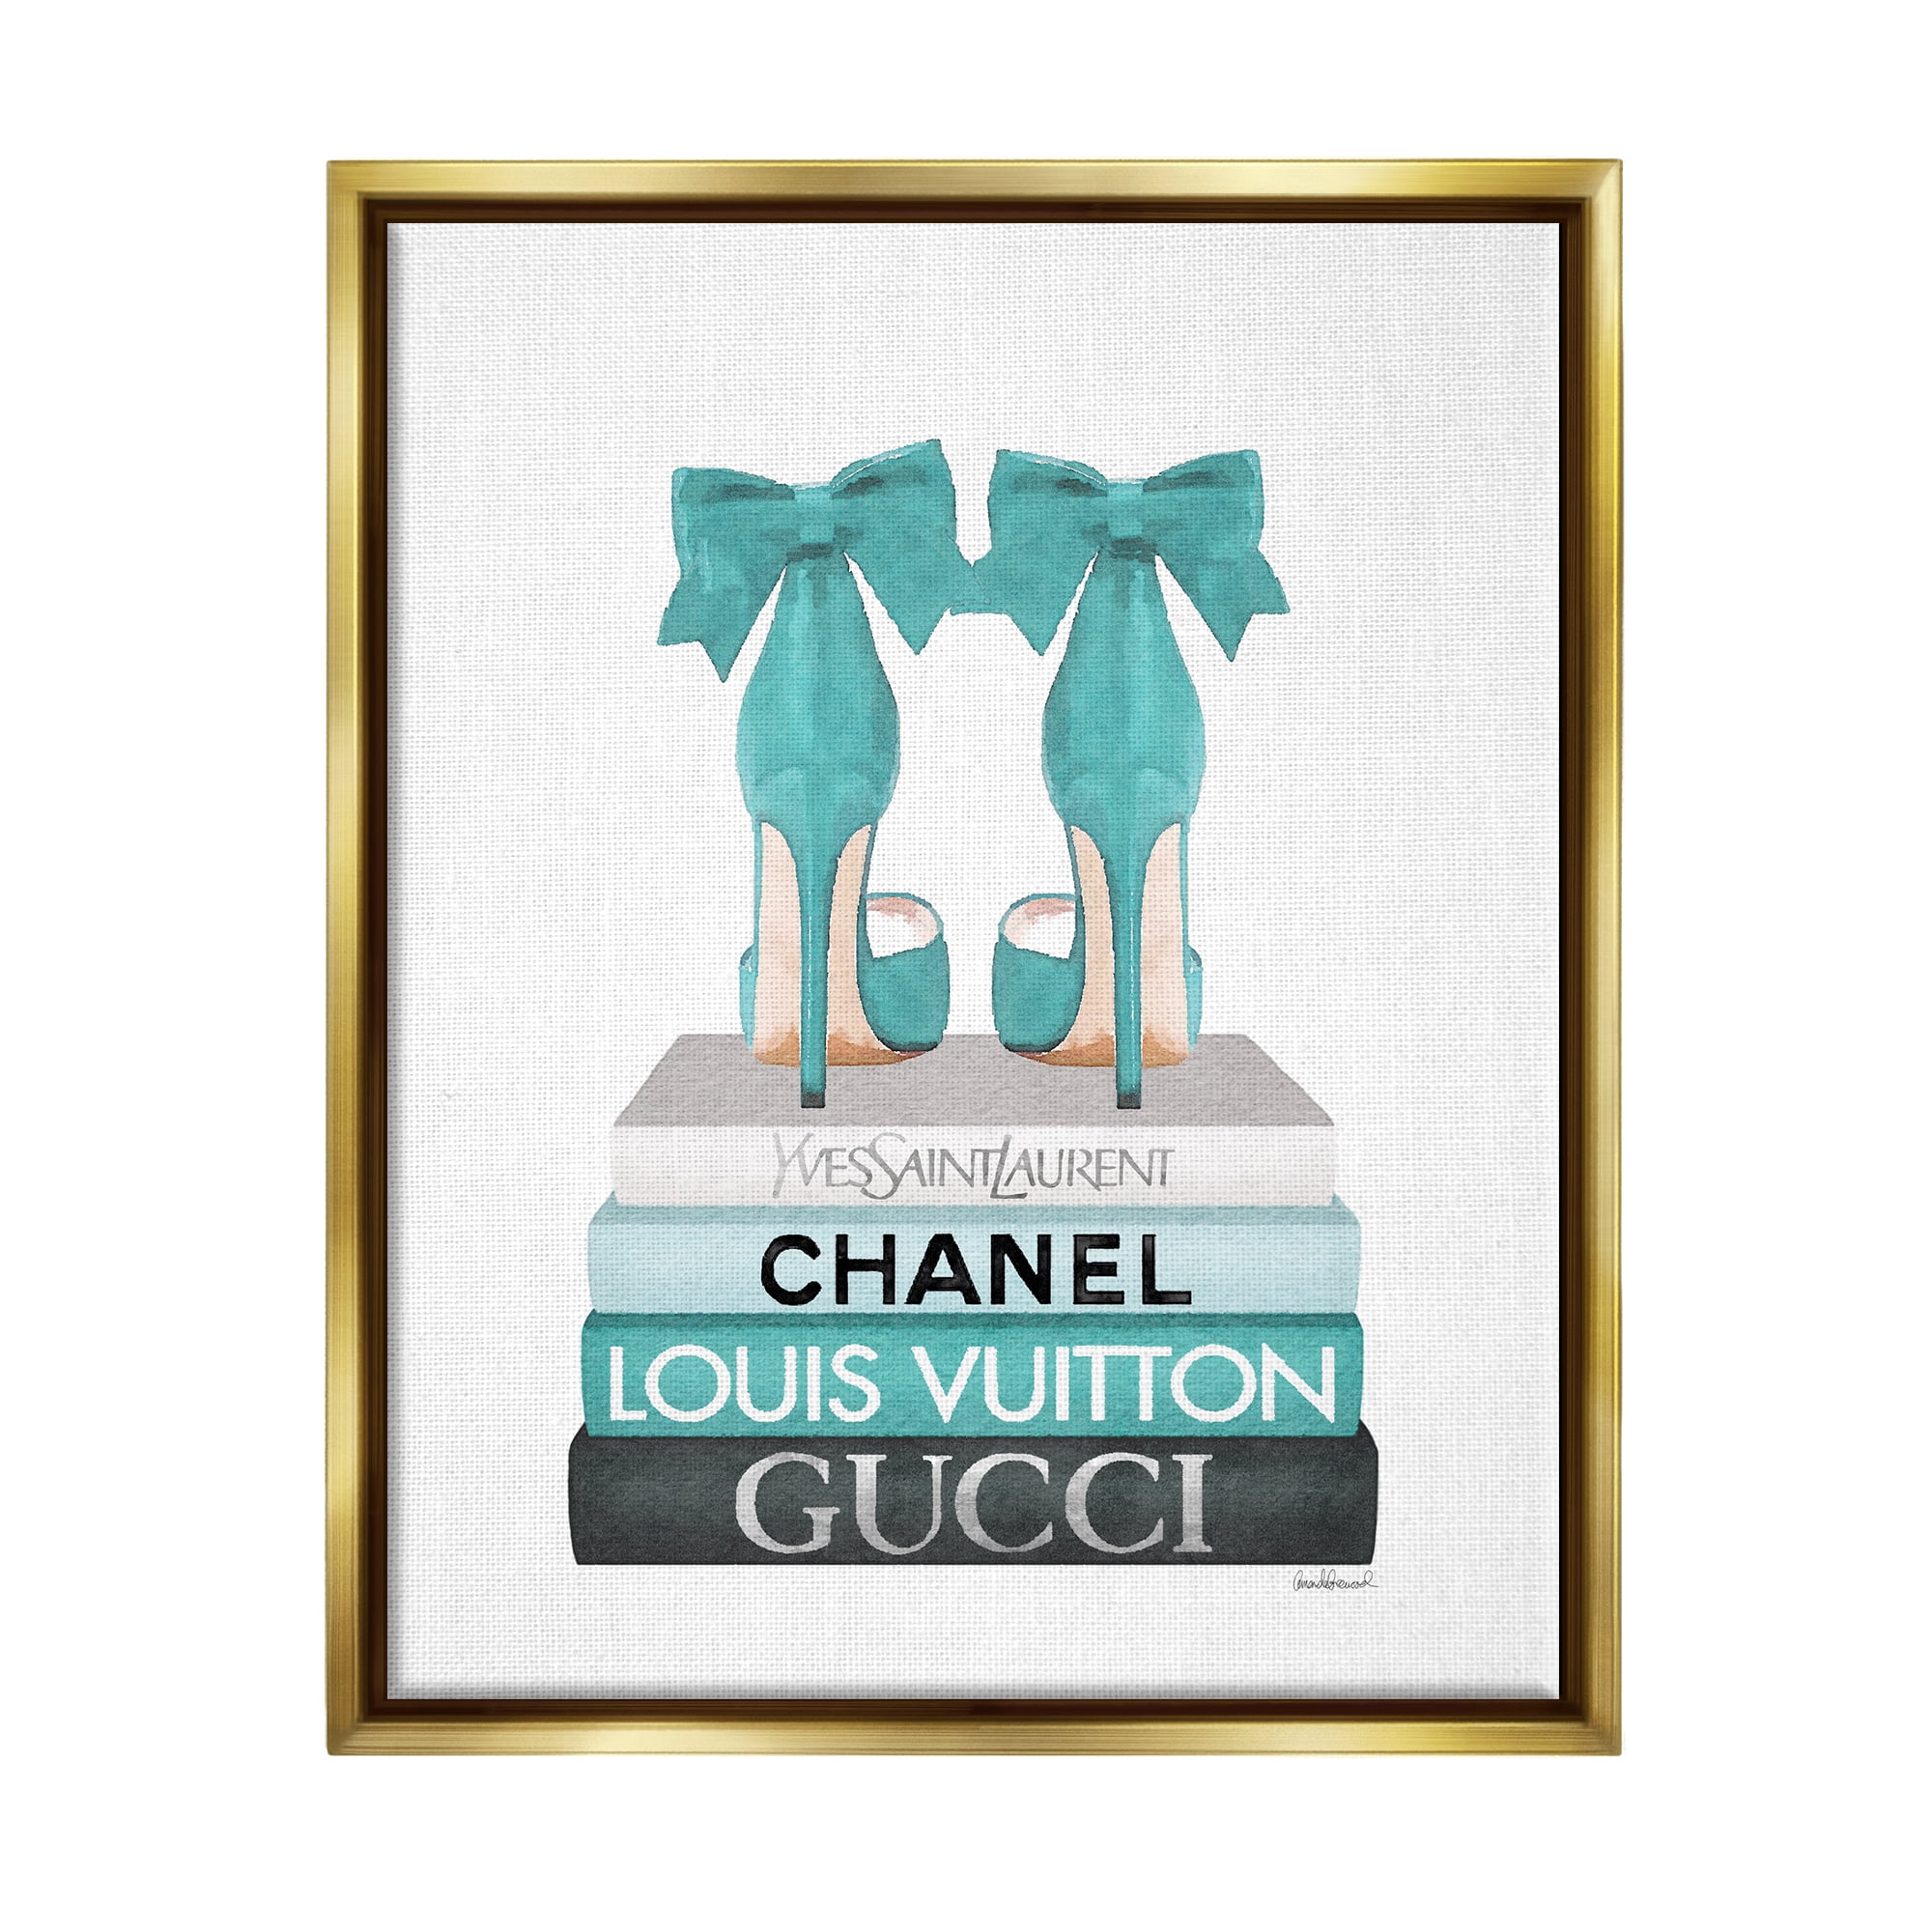 Stupell Industries Turquoise Bow Heels on Books Women's Fashion Metallic Gold Framed Floating Canvas Wall Art, 16x20, by Amanda Greenwood